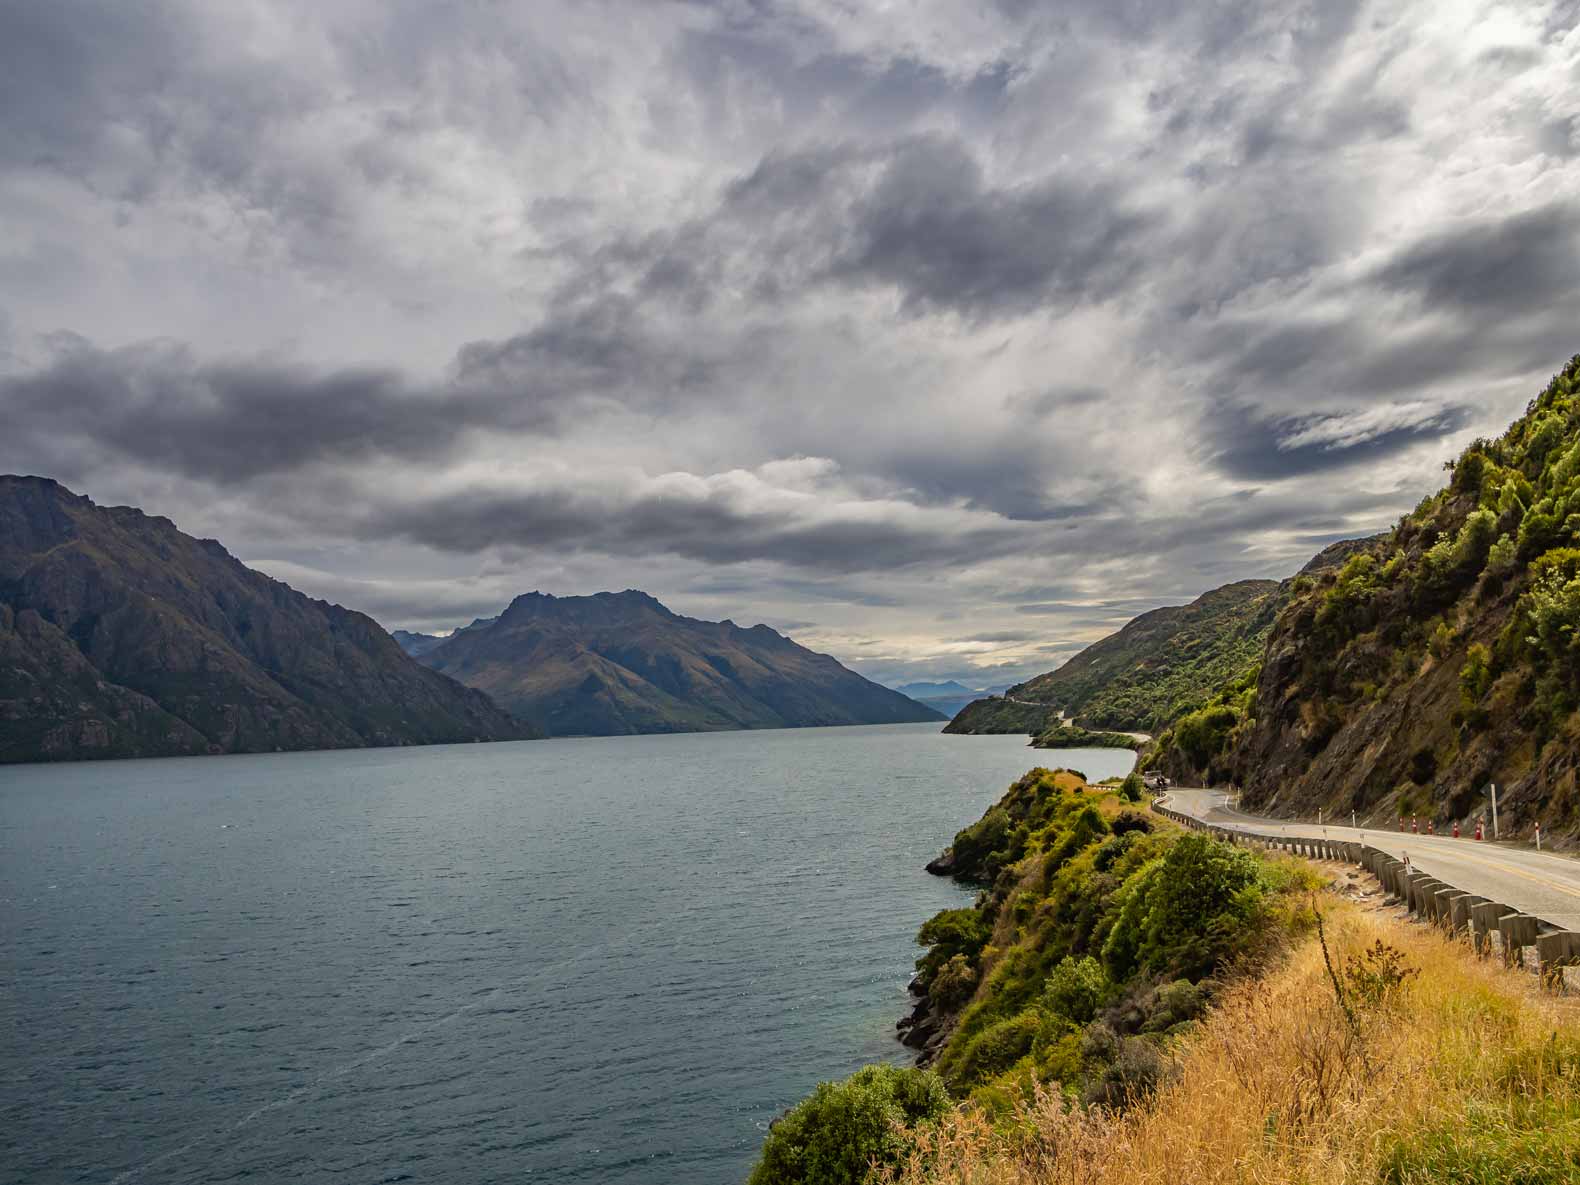 20 New Zealand pictures that'll fuel your wanderlust! - Bus stops ...